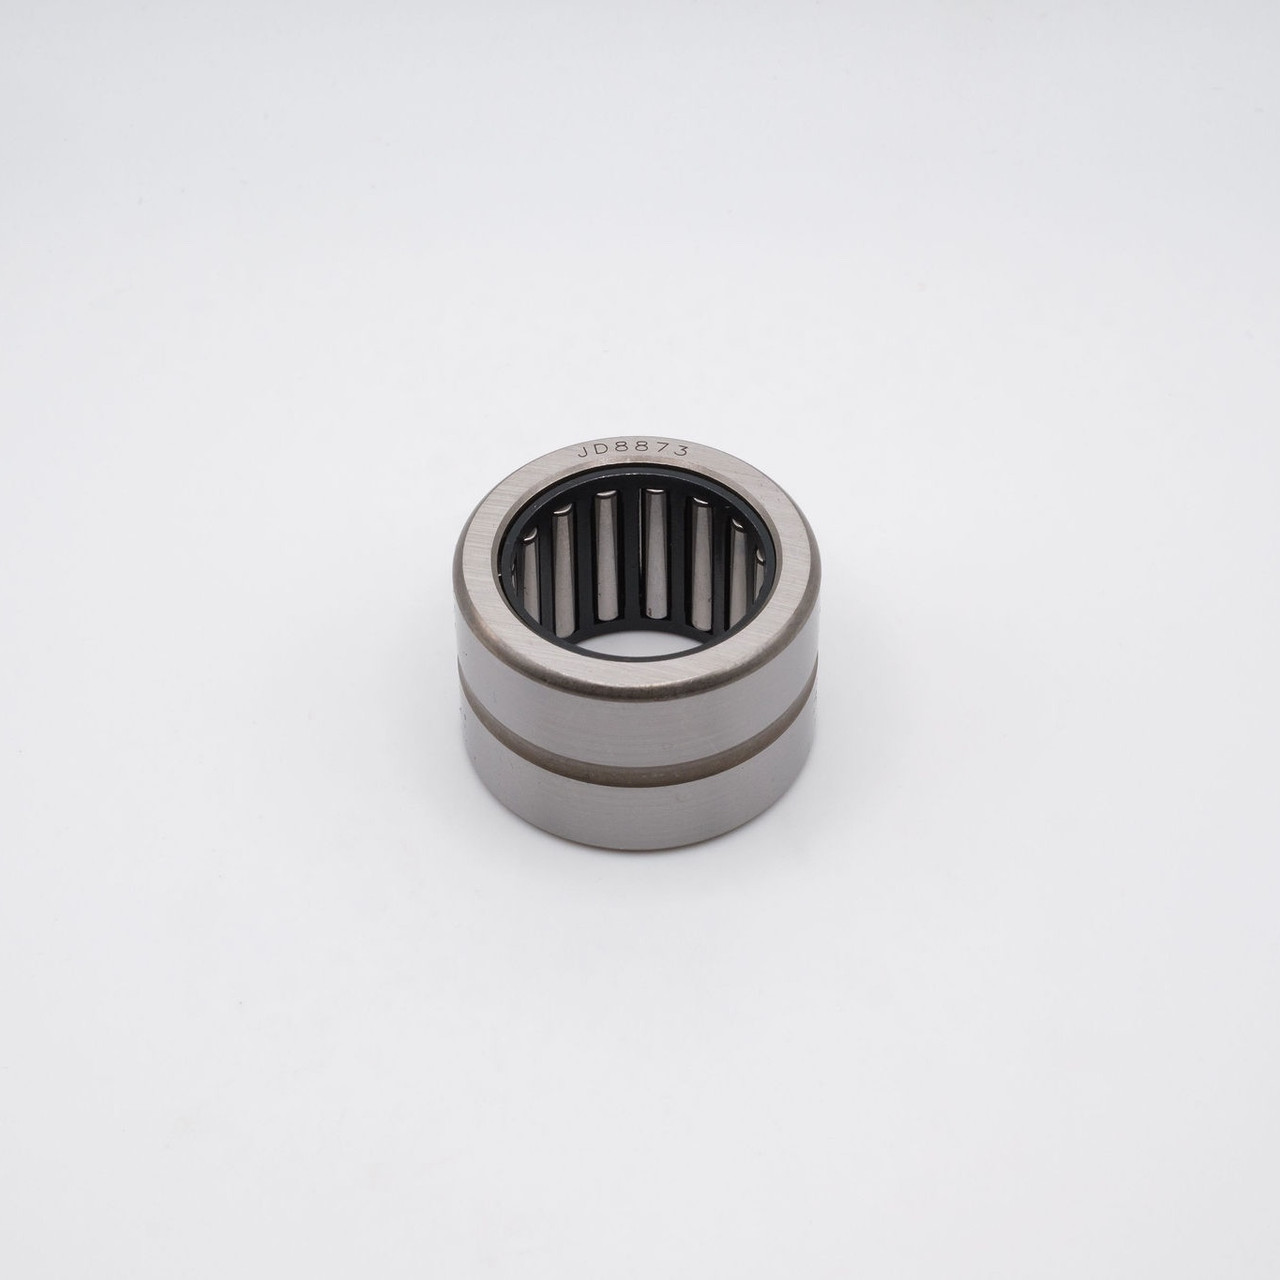 JD8873 Machined Needle Roller Bearing Top View